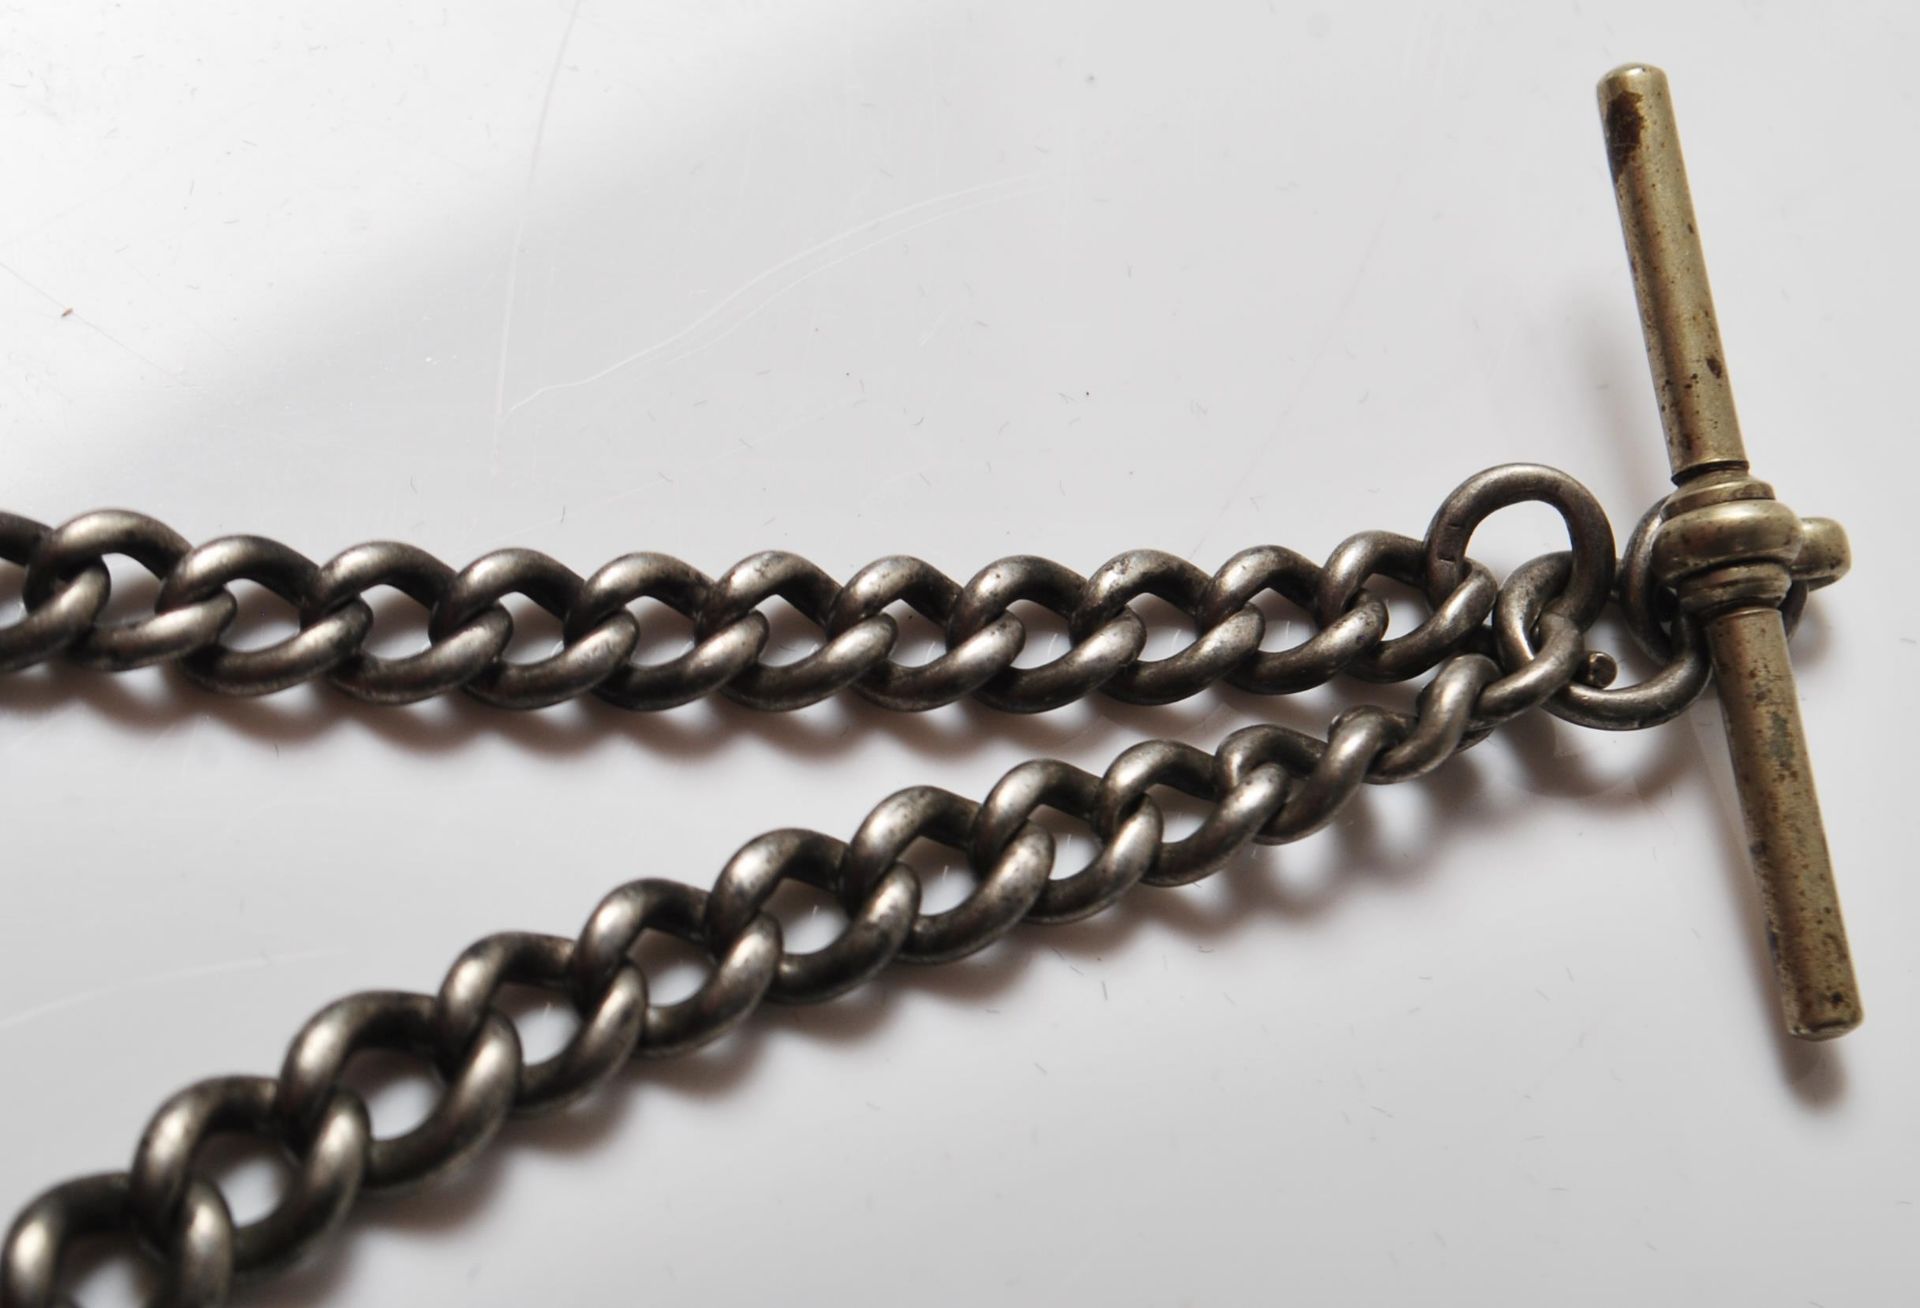 EARLY 20TH CENTURY SILVER POCKET WATCH CHAIN - Image 3 of 7